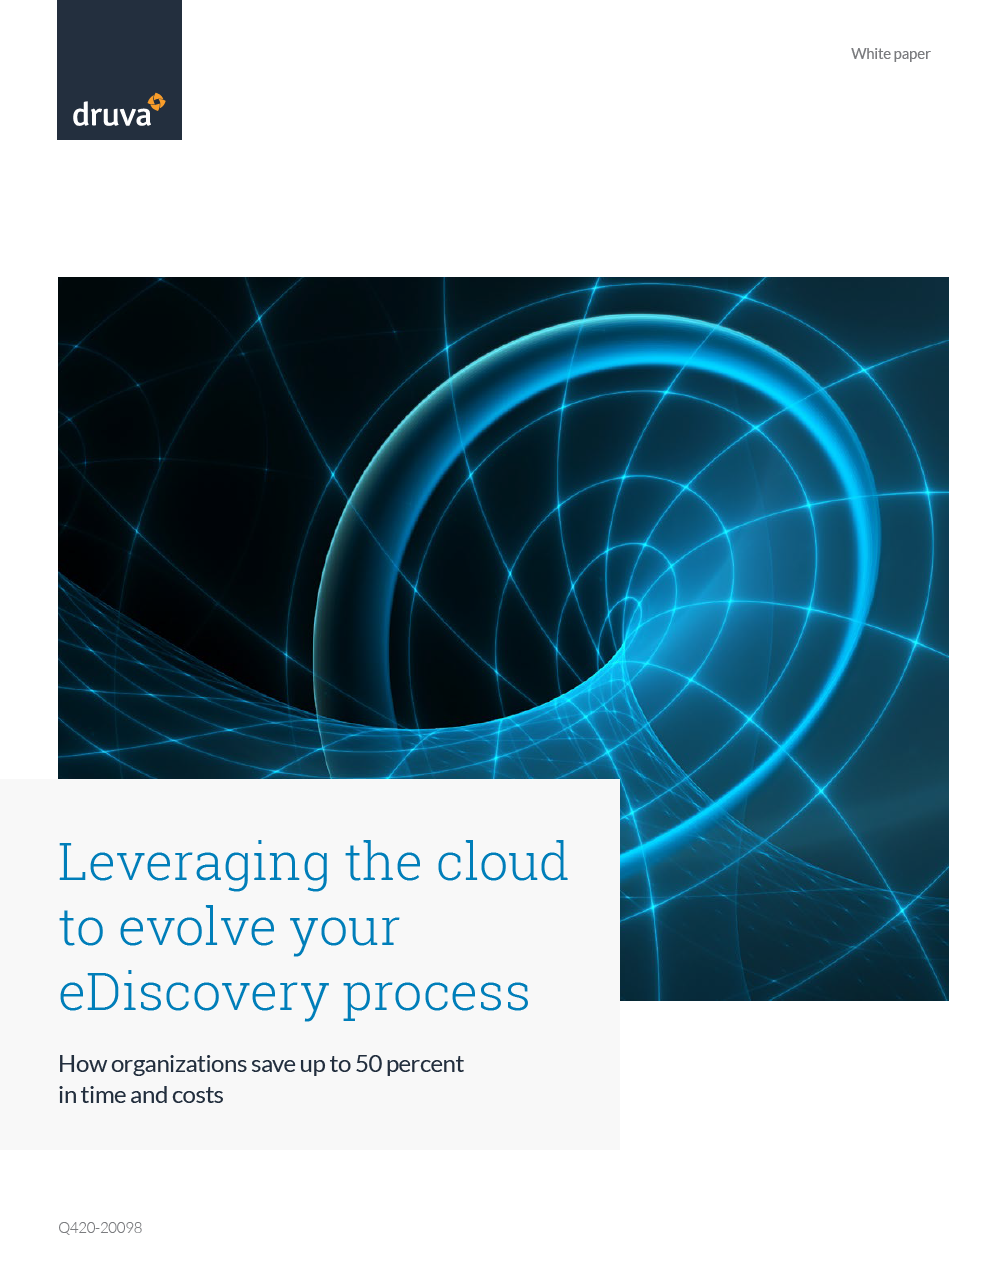 Leveraging the cloud to evolve your eDiscovery process